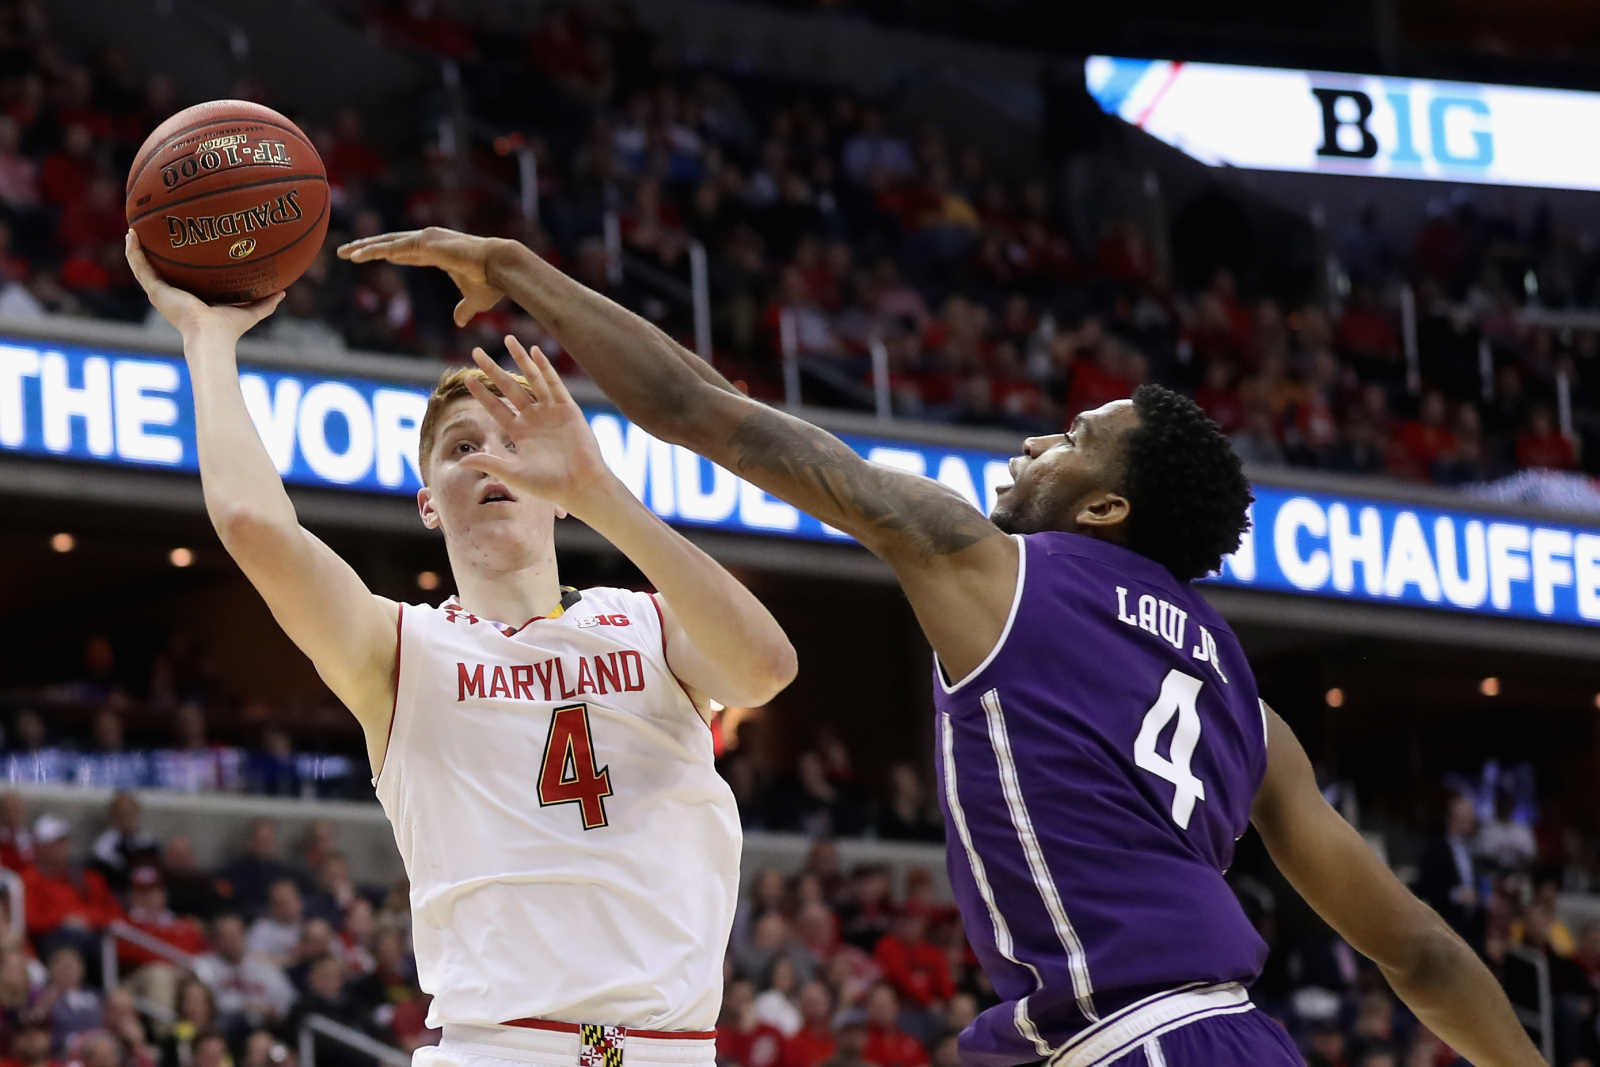 Maryland's Kevin Huerter leaving the Terps for the NBA